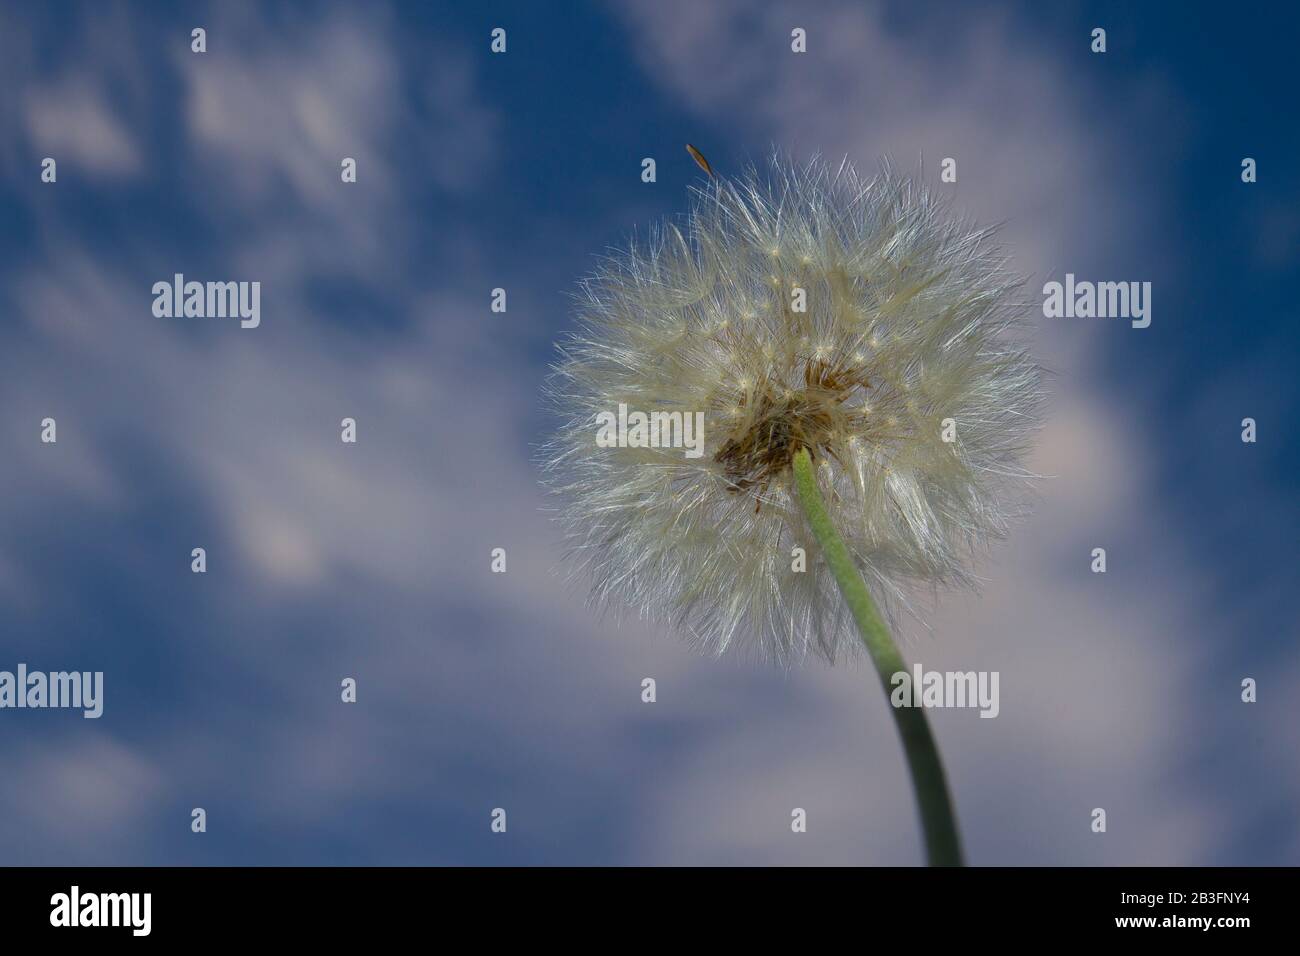 white dandelion (taraxacum officinalis) or erythrospermum plant flower against a blurry blue sky and clouds Stock Photo